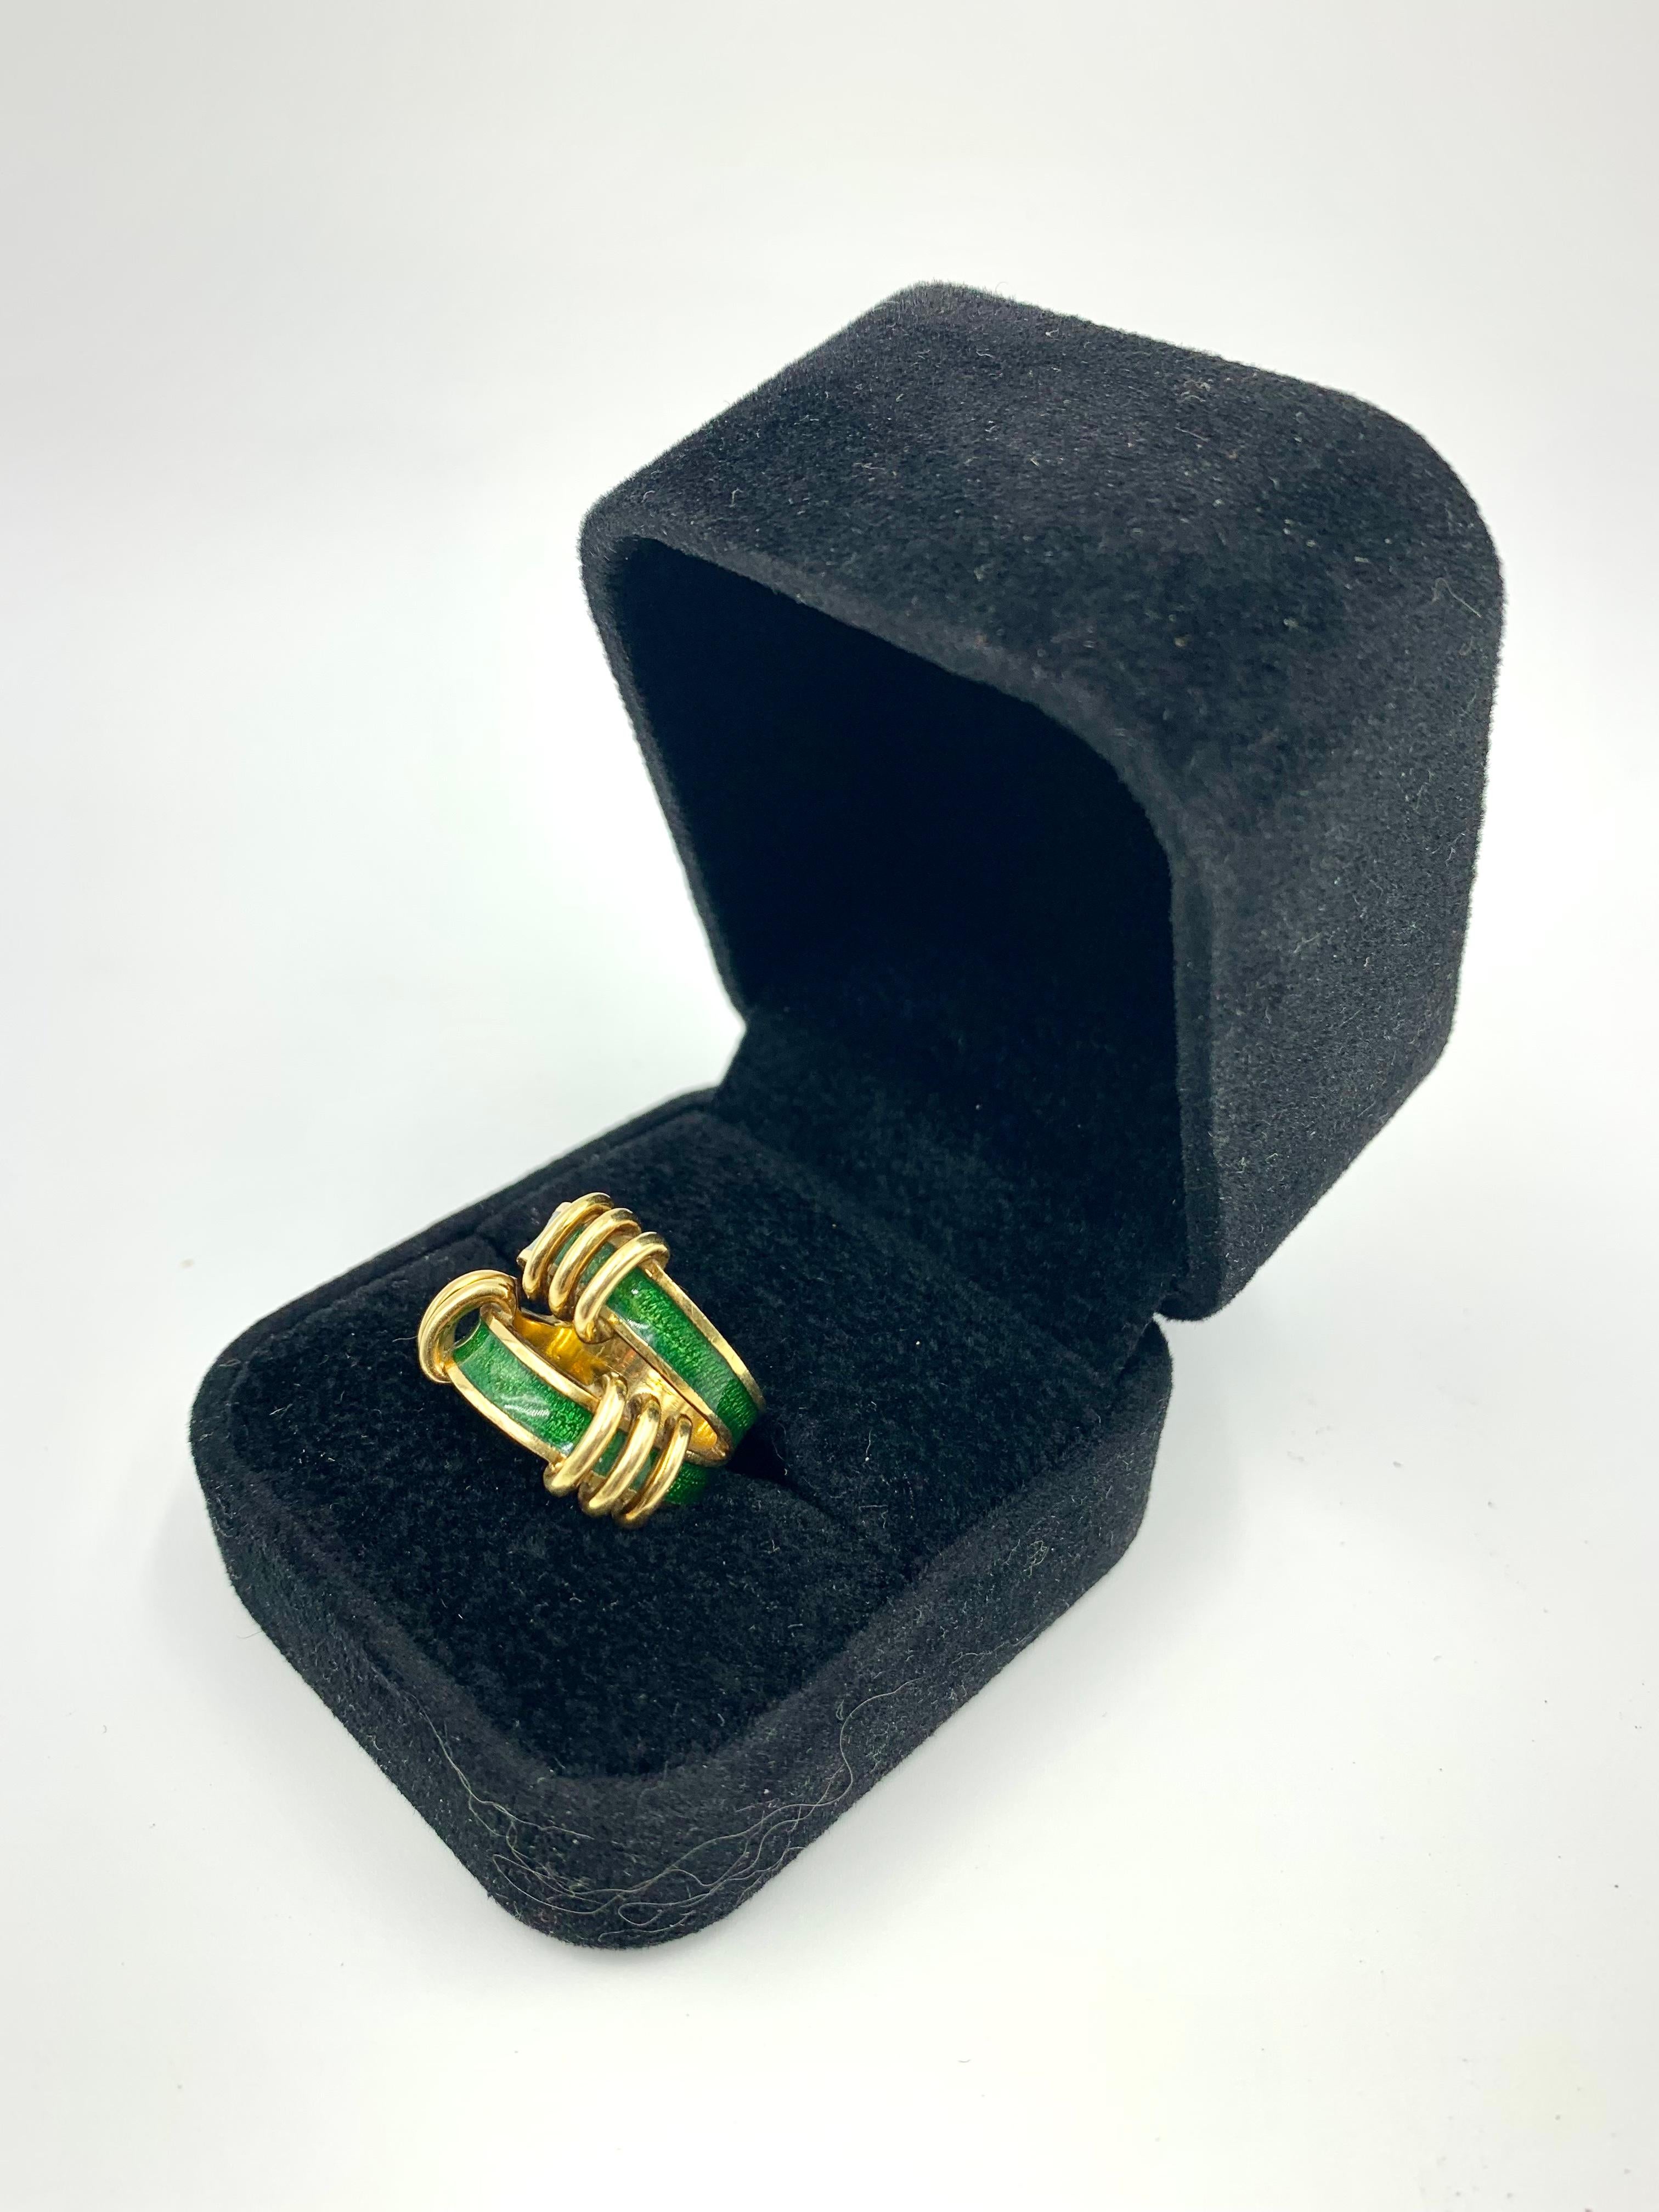 Rare Tiffany & Co. Schlumberger 18K Yellow Gold Emerald Enamel Tiered Knot Ring 3